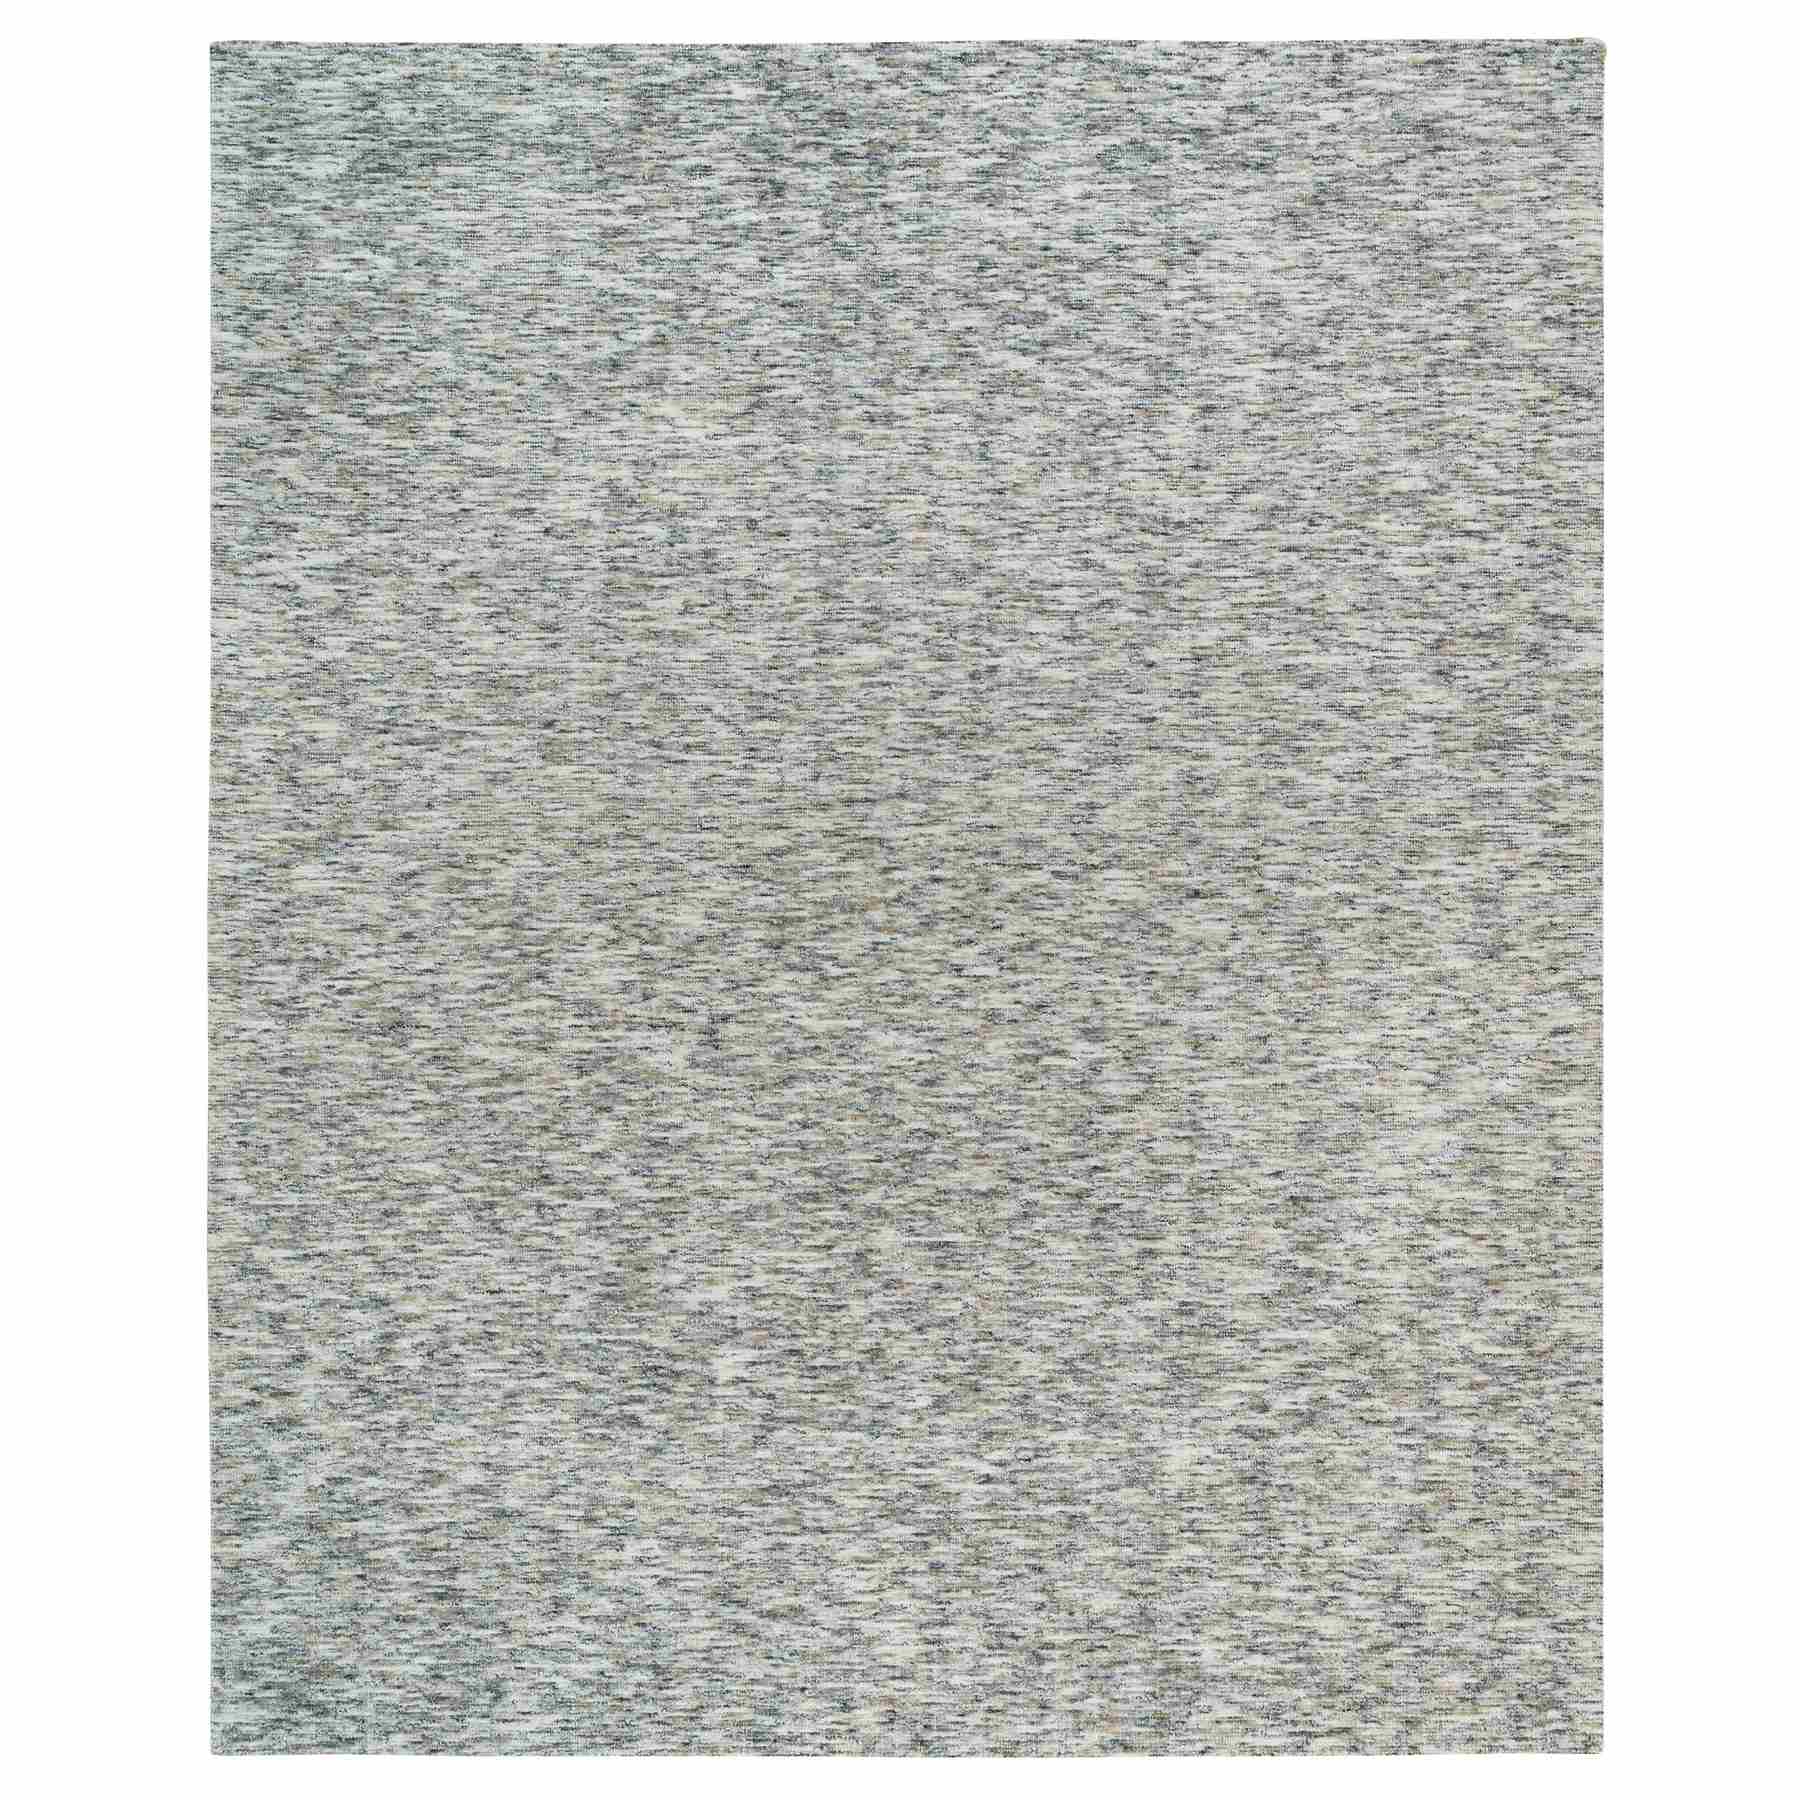 Earth Tone Colors, Modern Striped Design, Soft to the Touch, Pure Wool, Hand Loomed, Oversized Oriental Rug